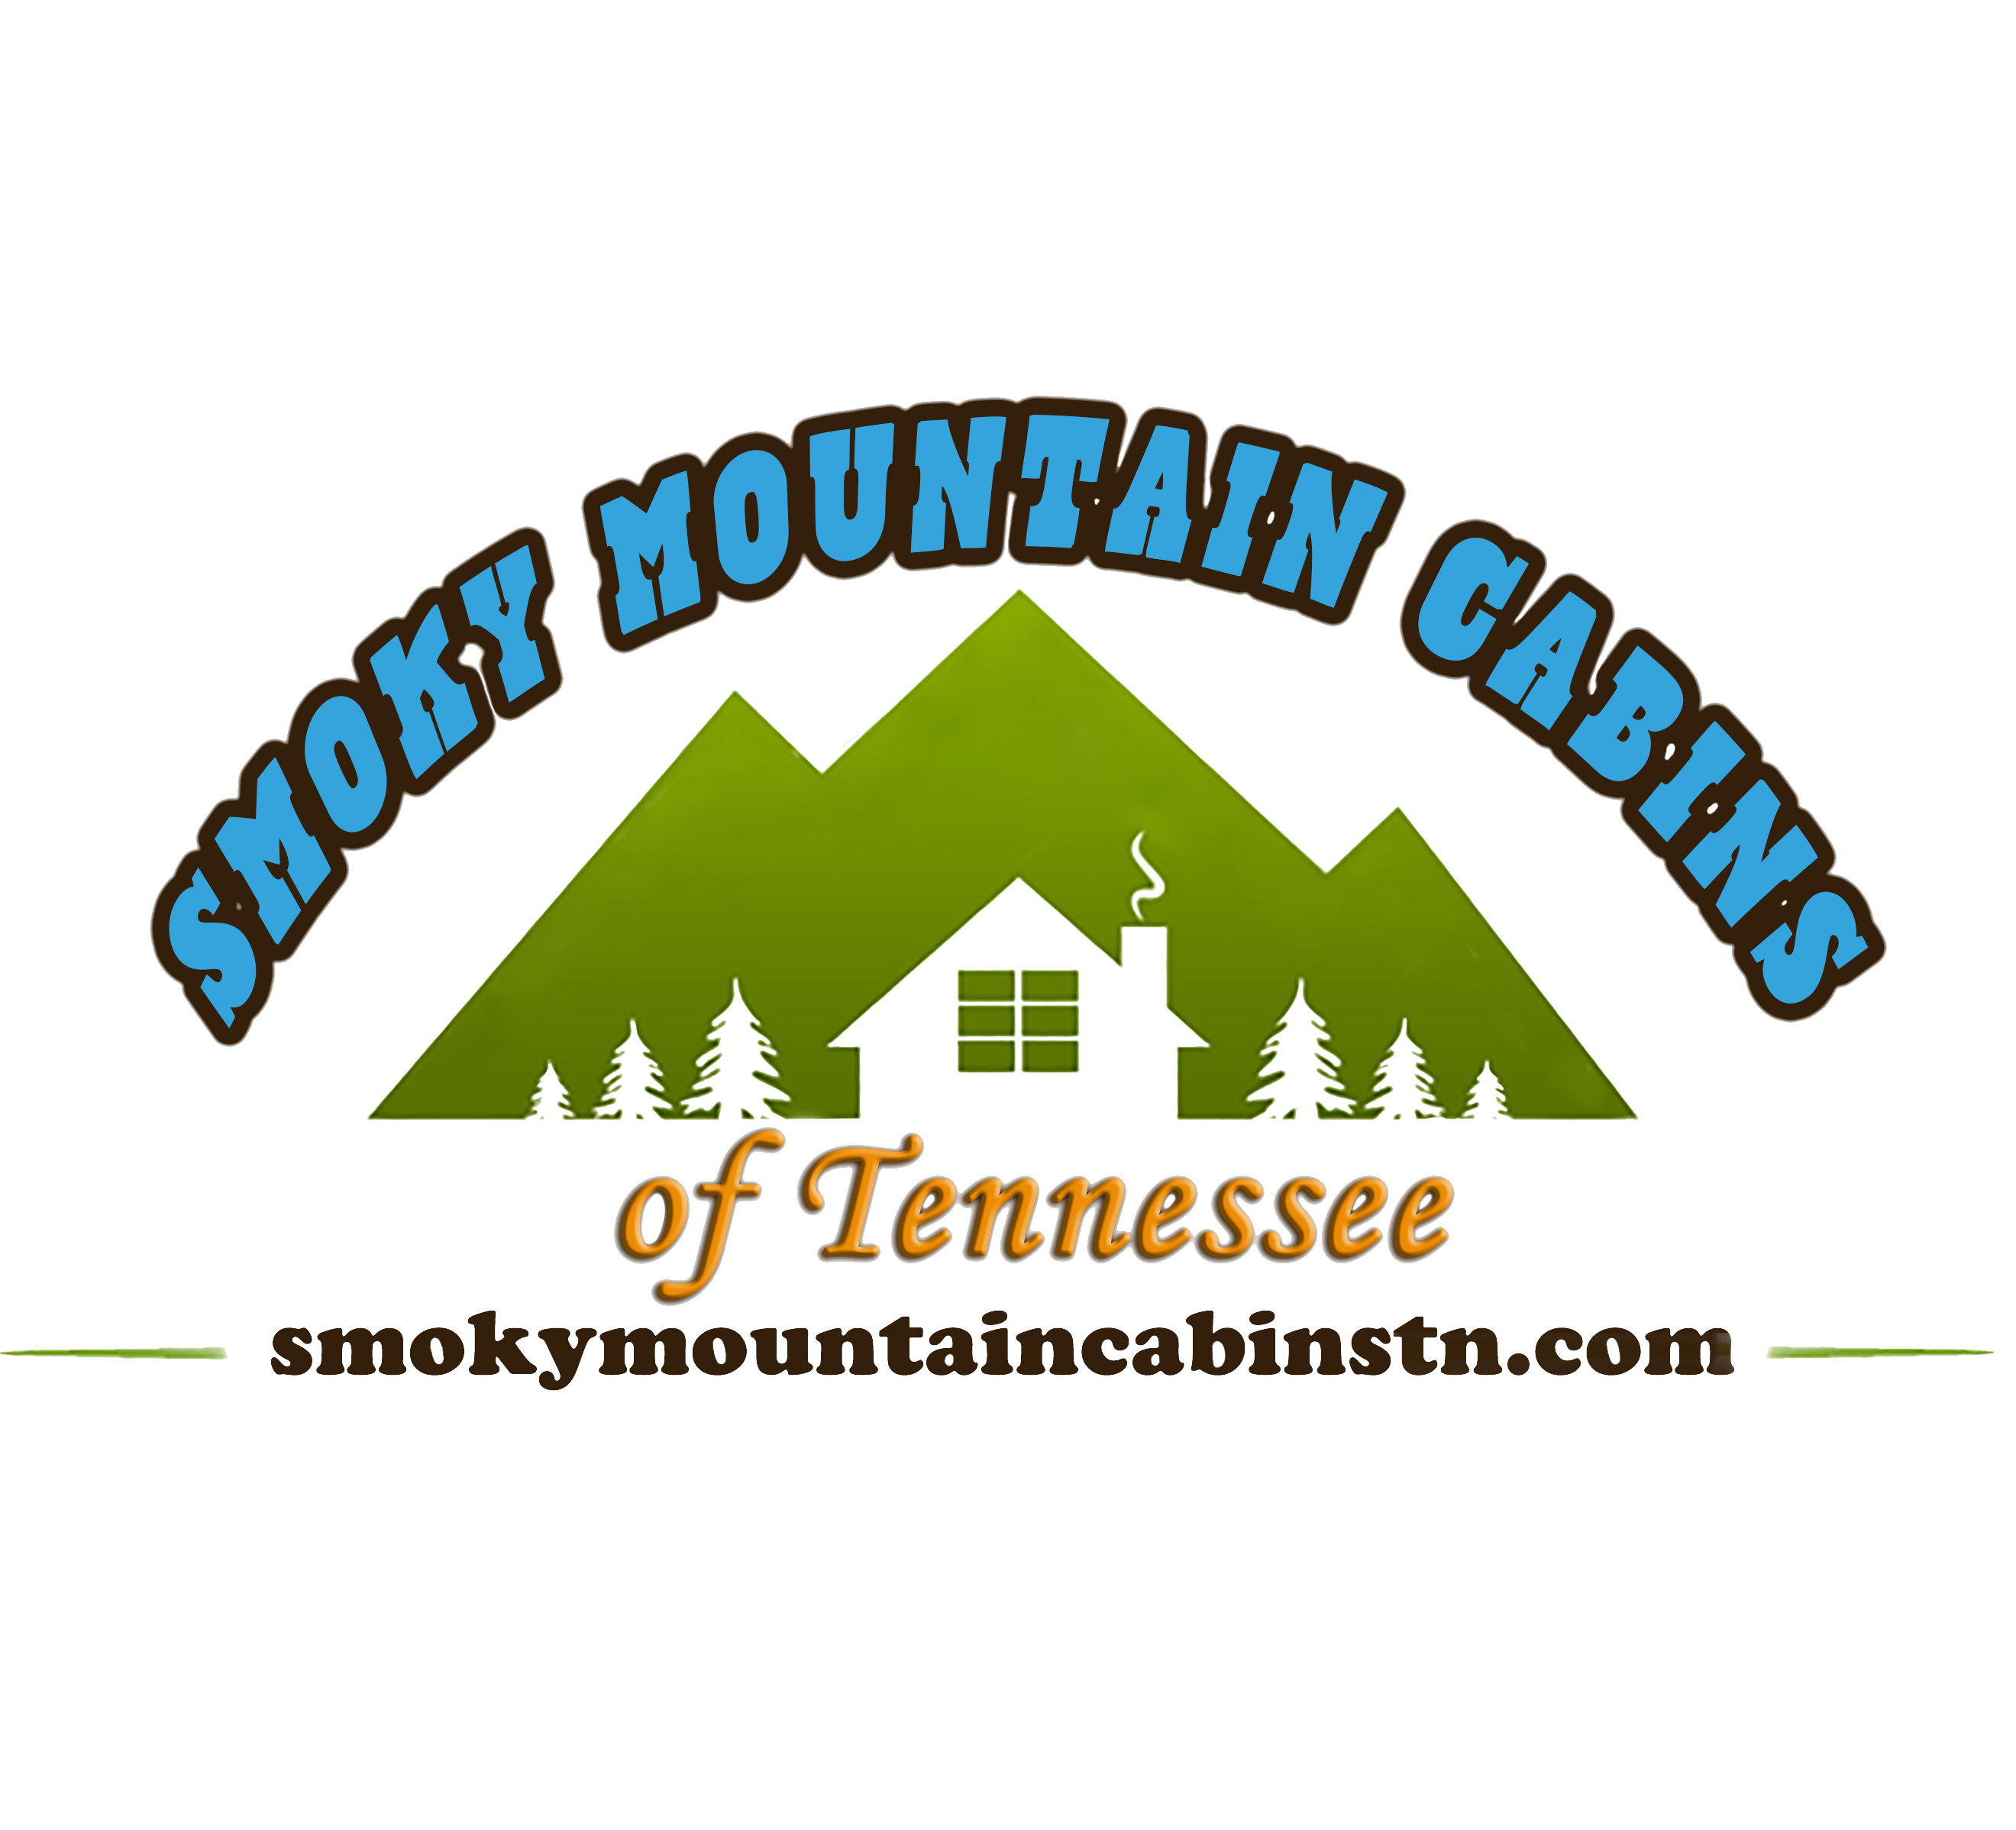 Smoky Mountain Cabins of Tennessee logo